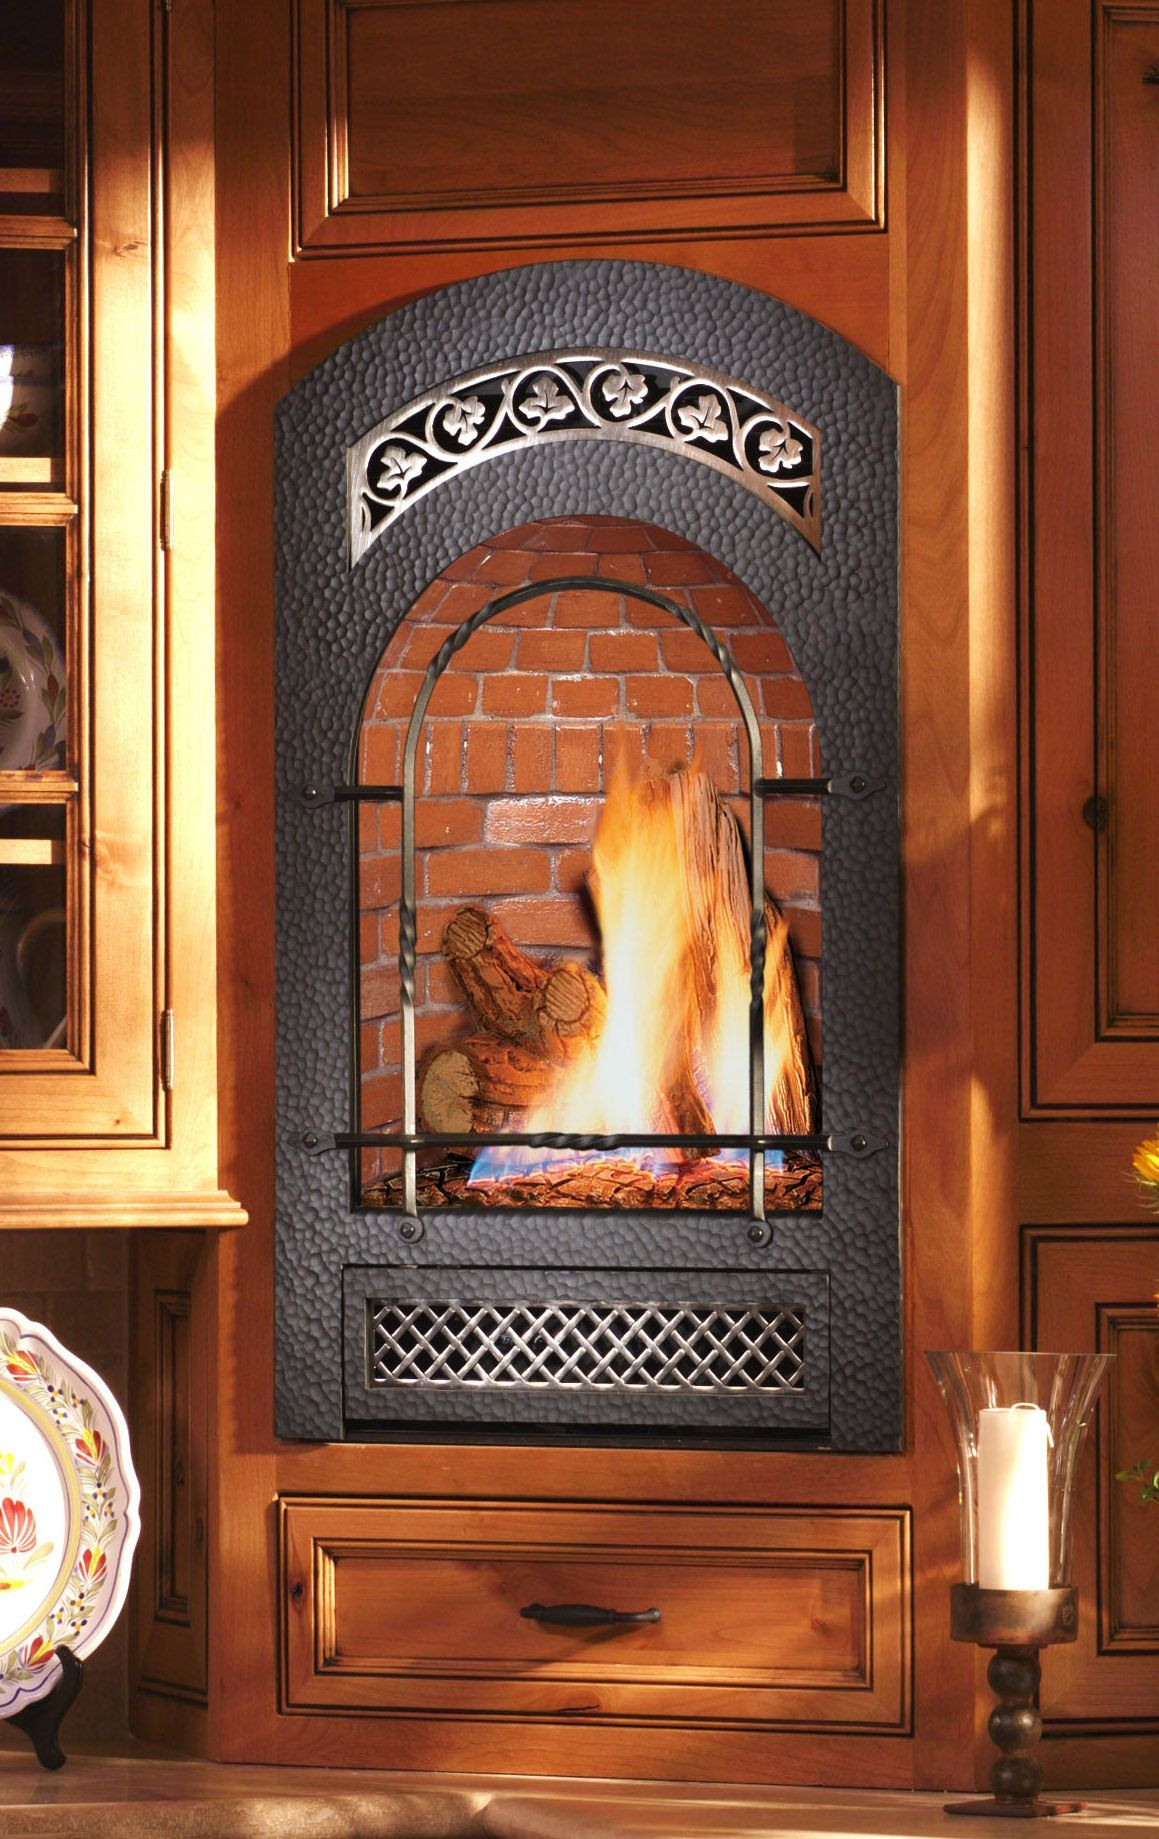 Small Heaters For Bedroom
 Small wall mounted gas fireplace Great for bedrooms